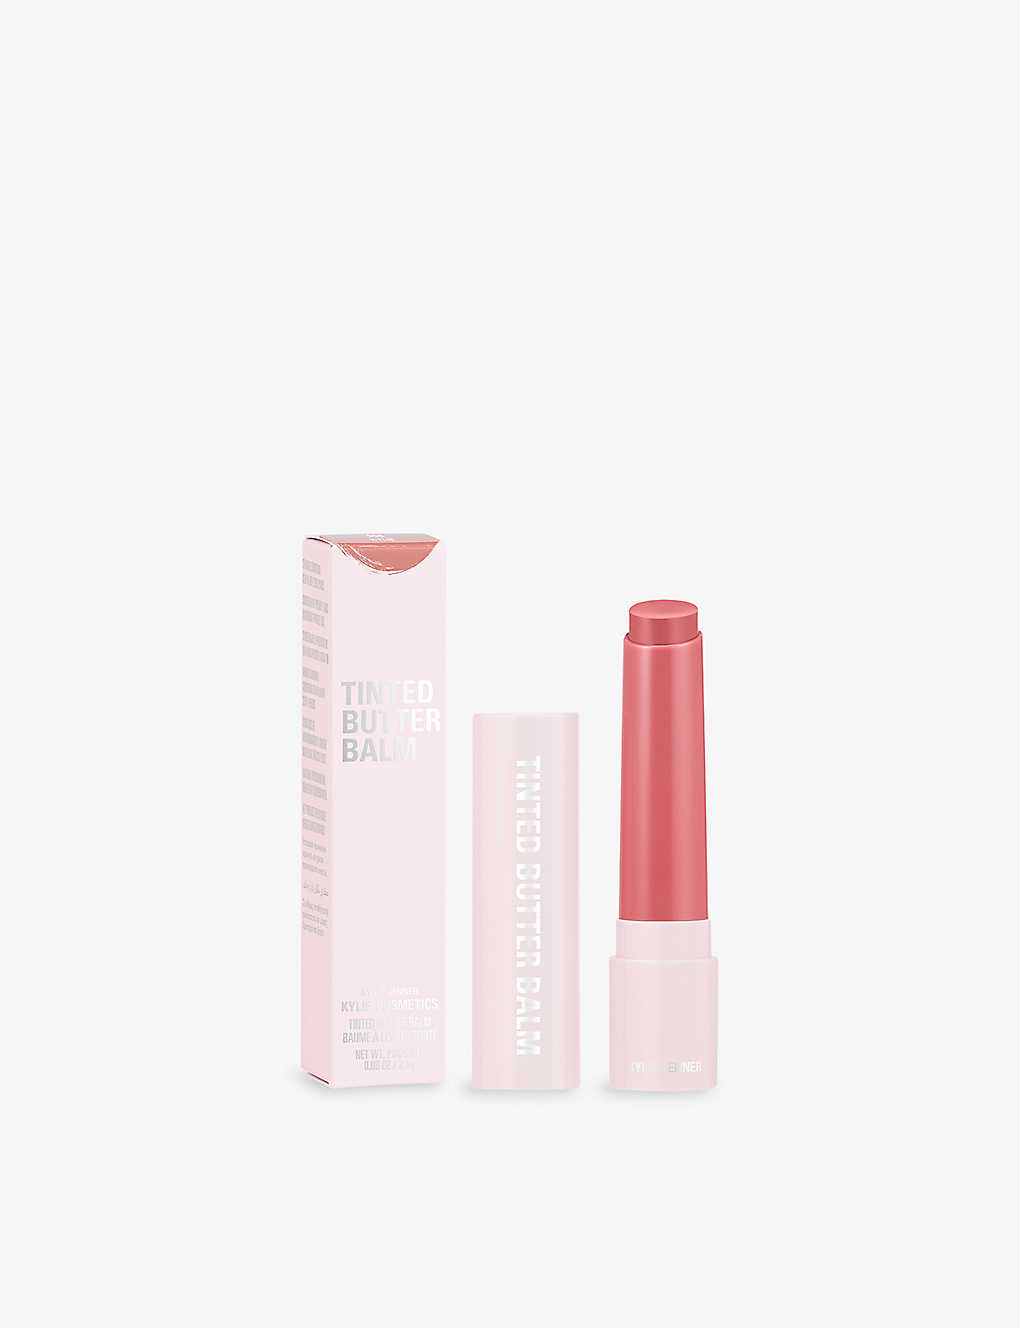 Kylie By Kylie Jenner Kylie Tinted Butter Balm 2.4g